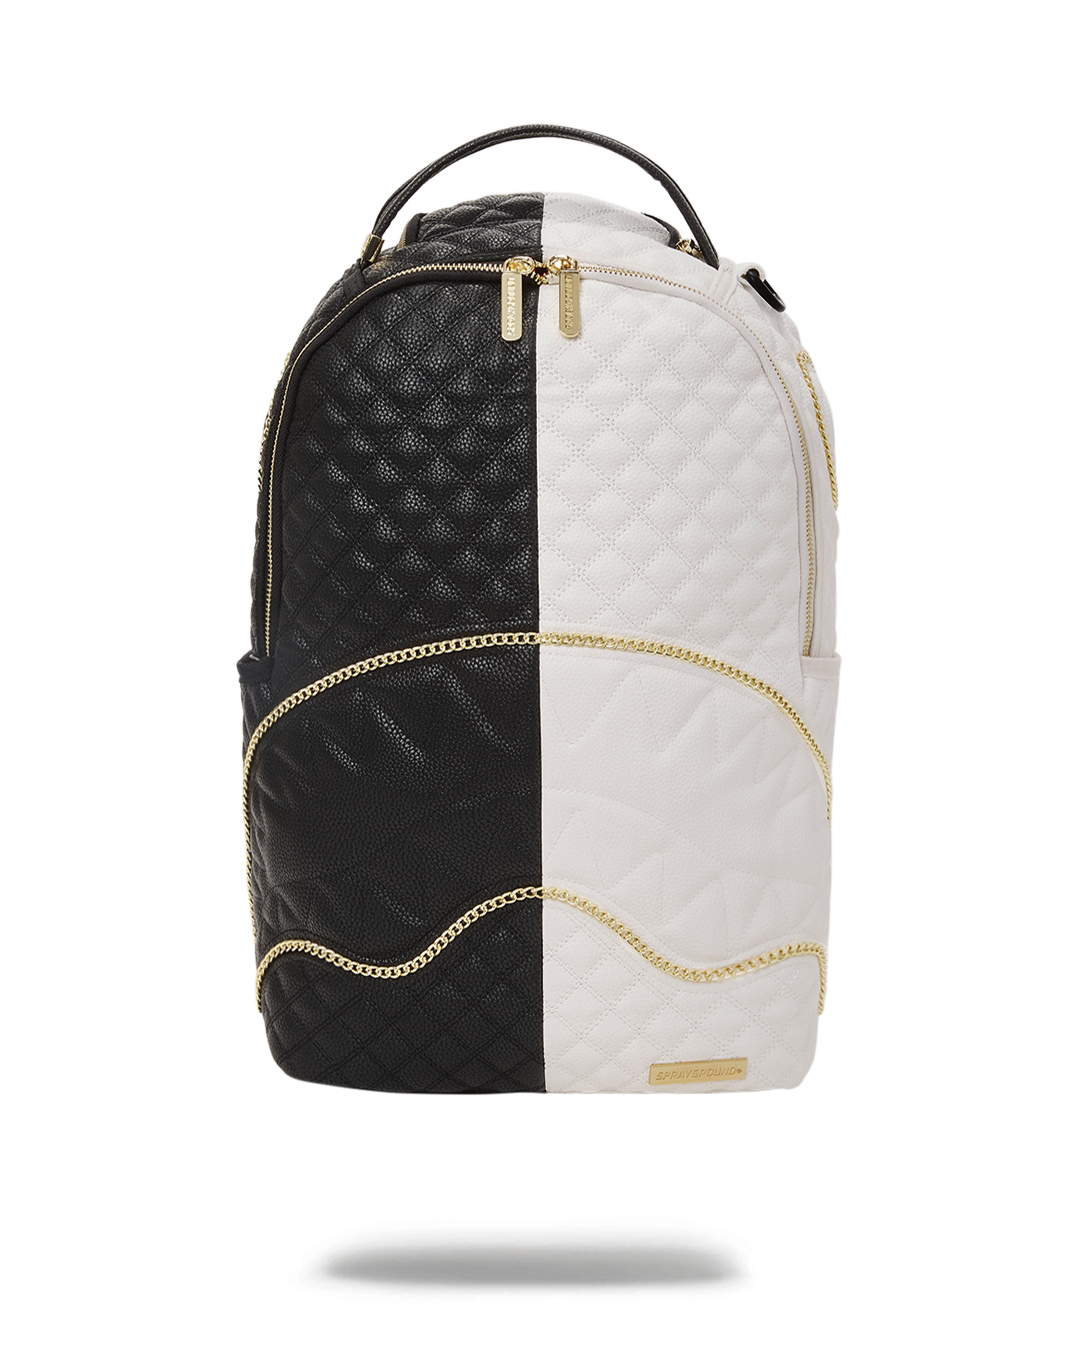 Leveled Up quilted backpack, Sprayground